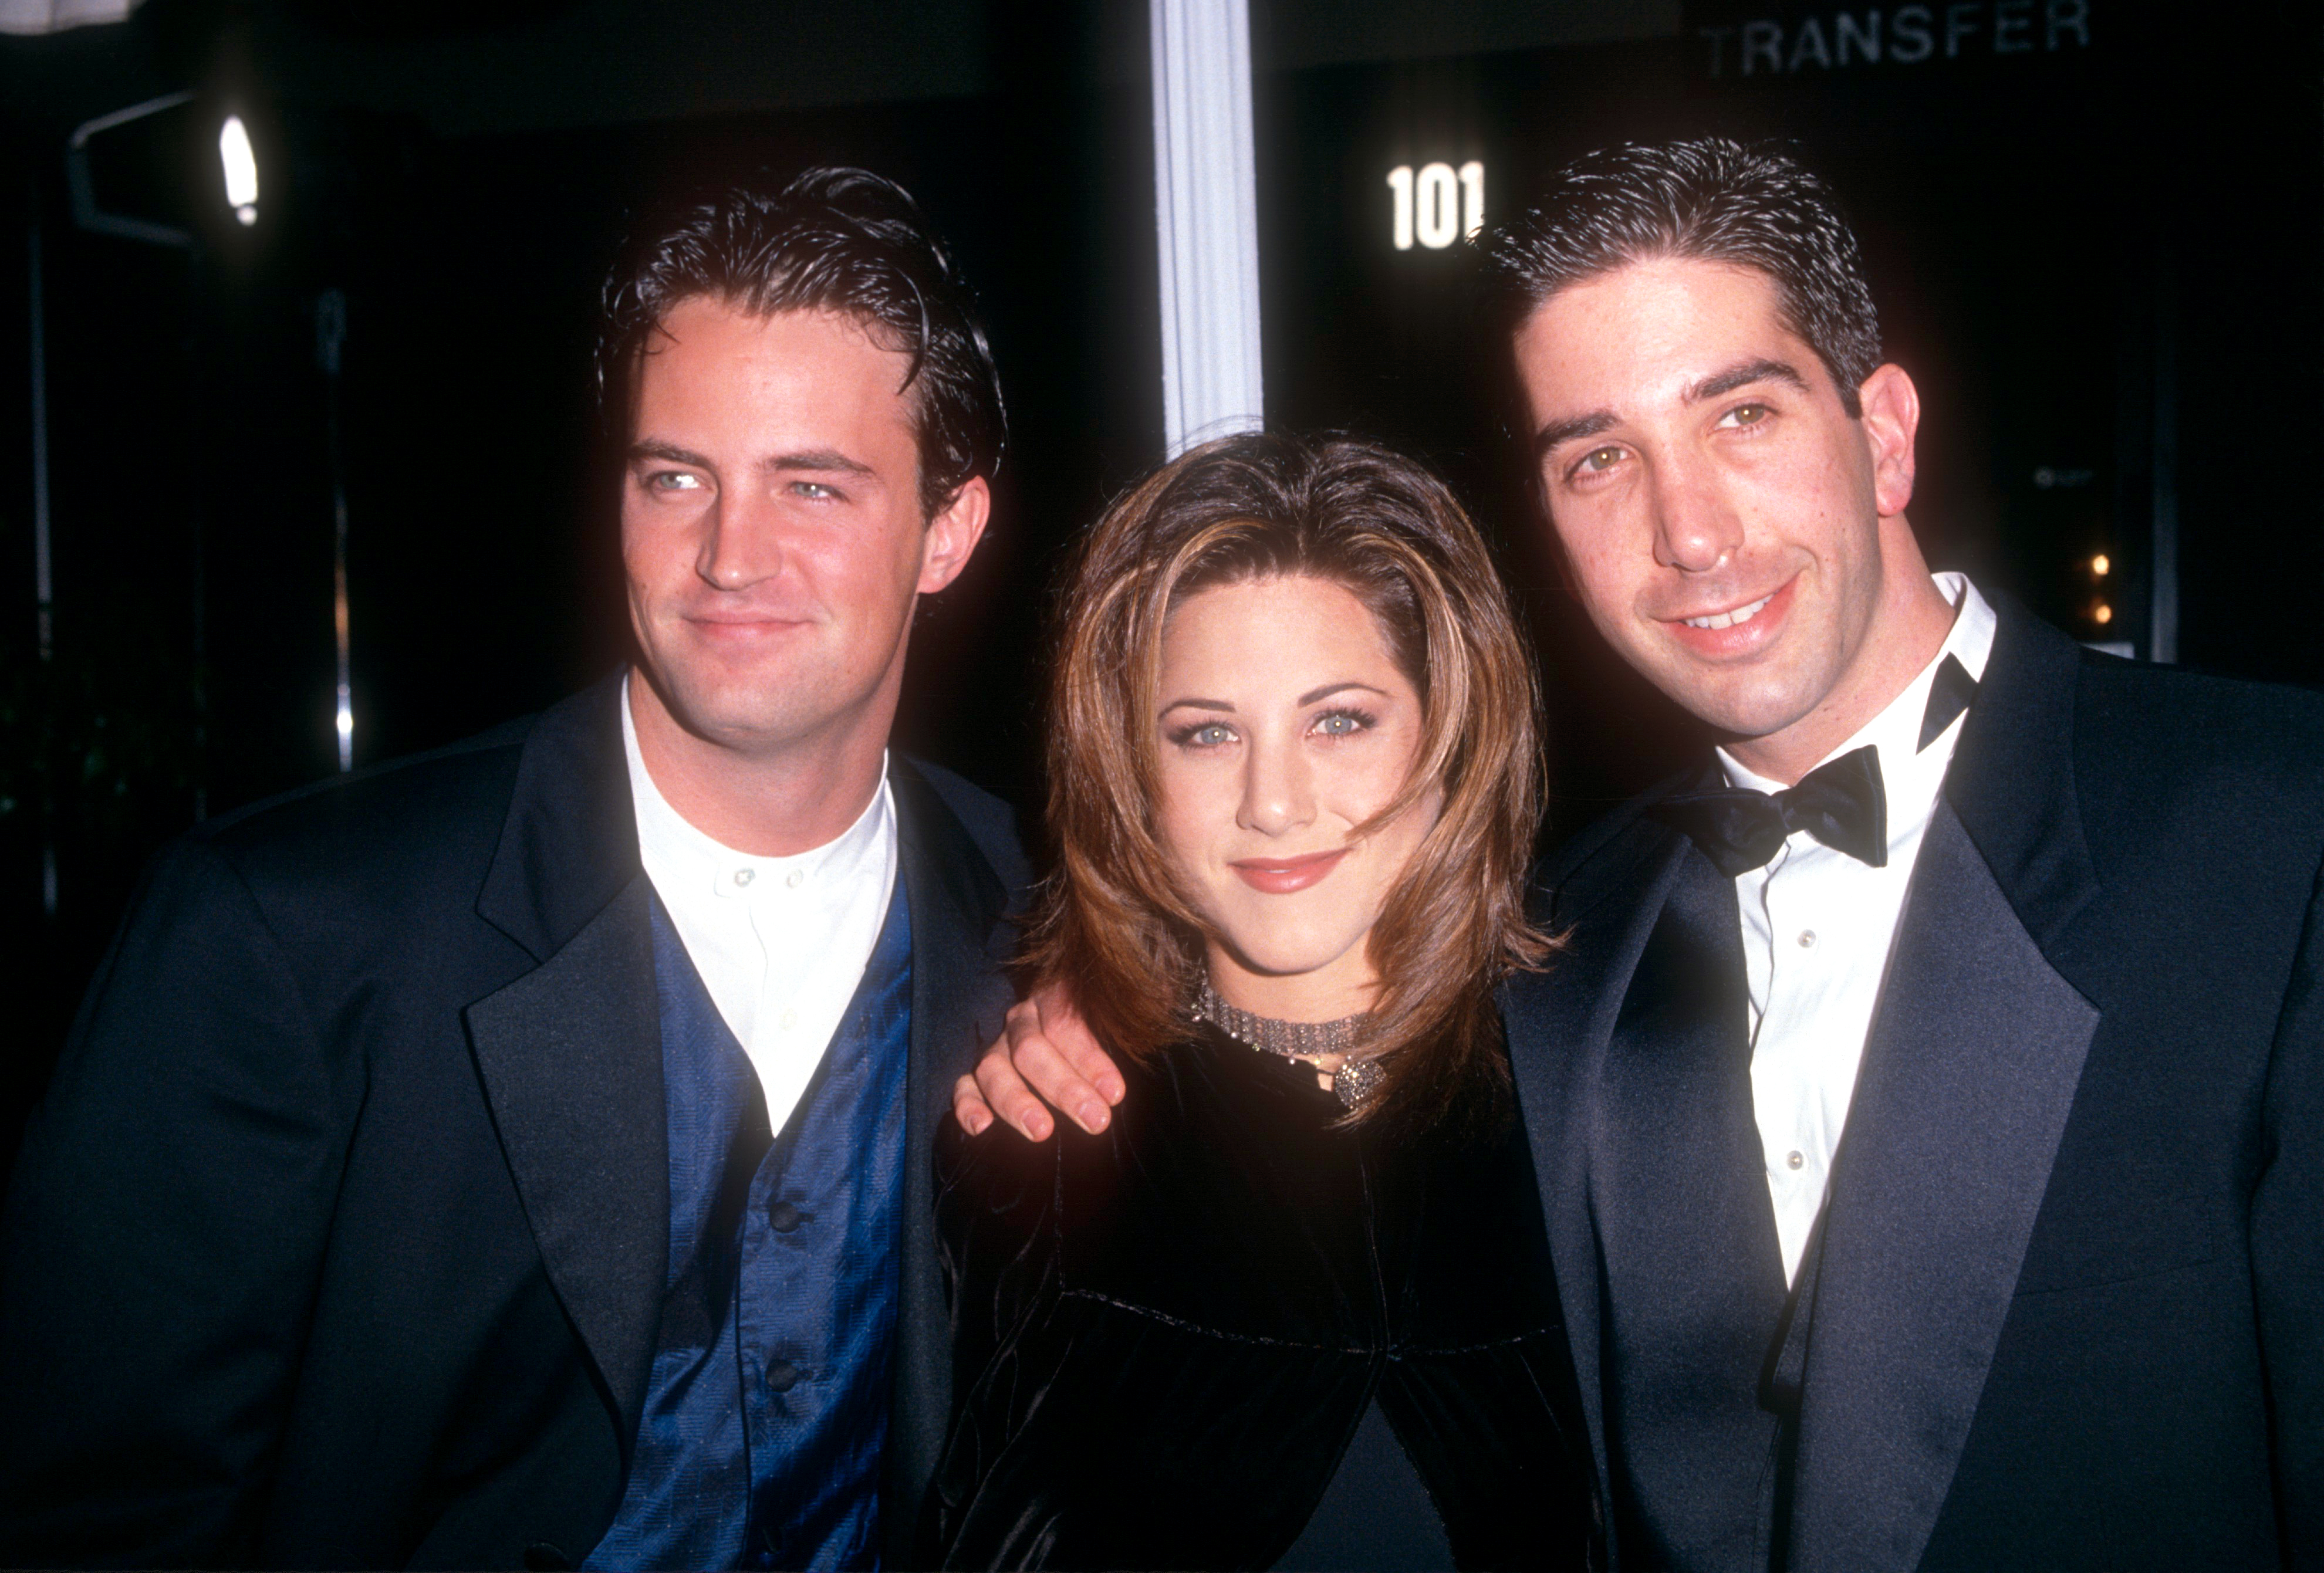 Matthew Perry, Jennifer Aniston, and David Schwimmer at the 21st Annual People's Choice Awards in Universal City, California on March 5, 1995 | Source: Getty Images